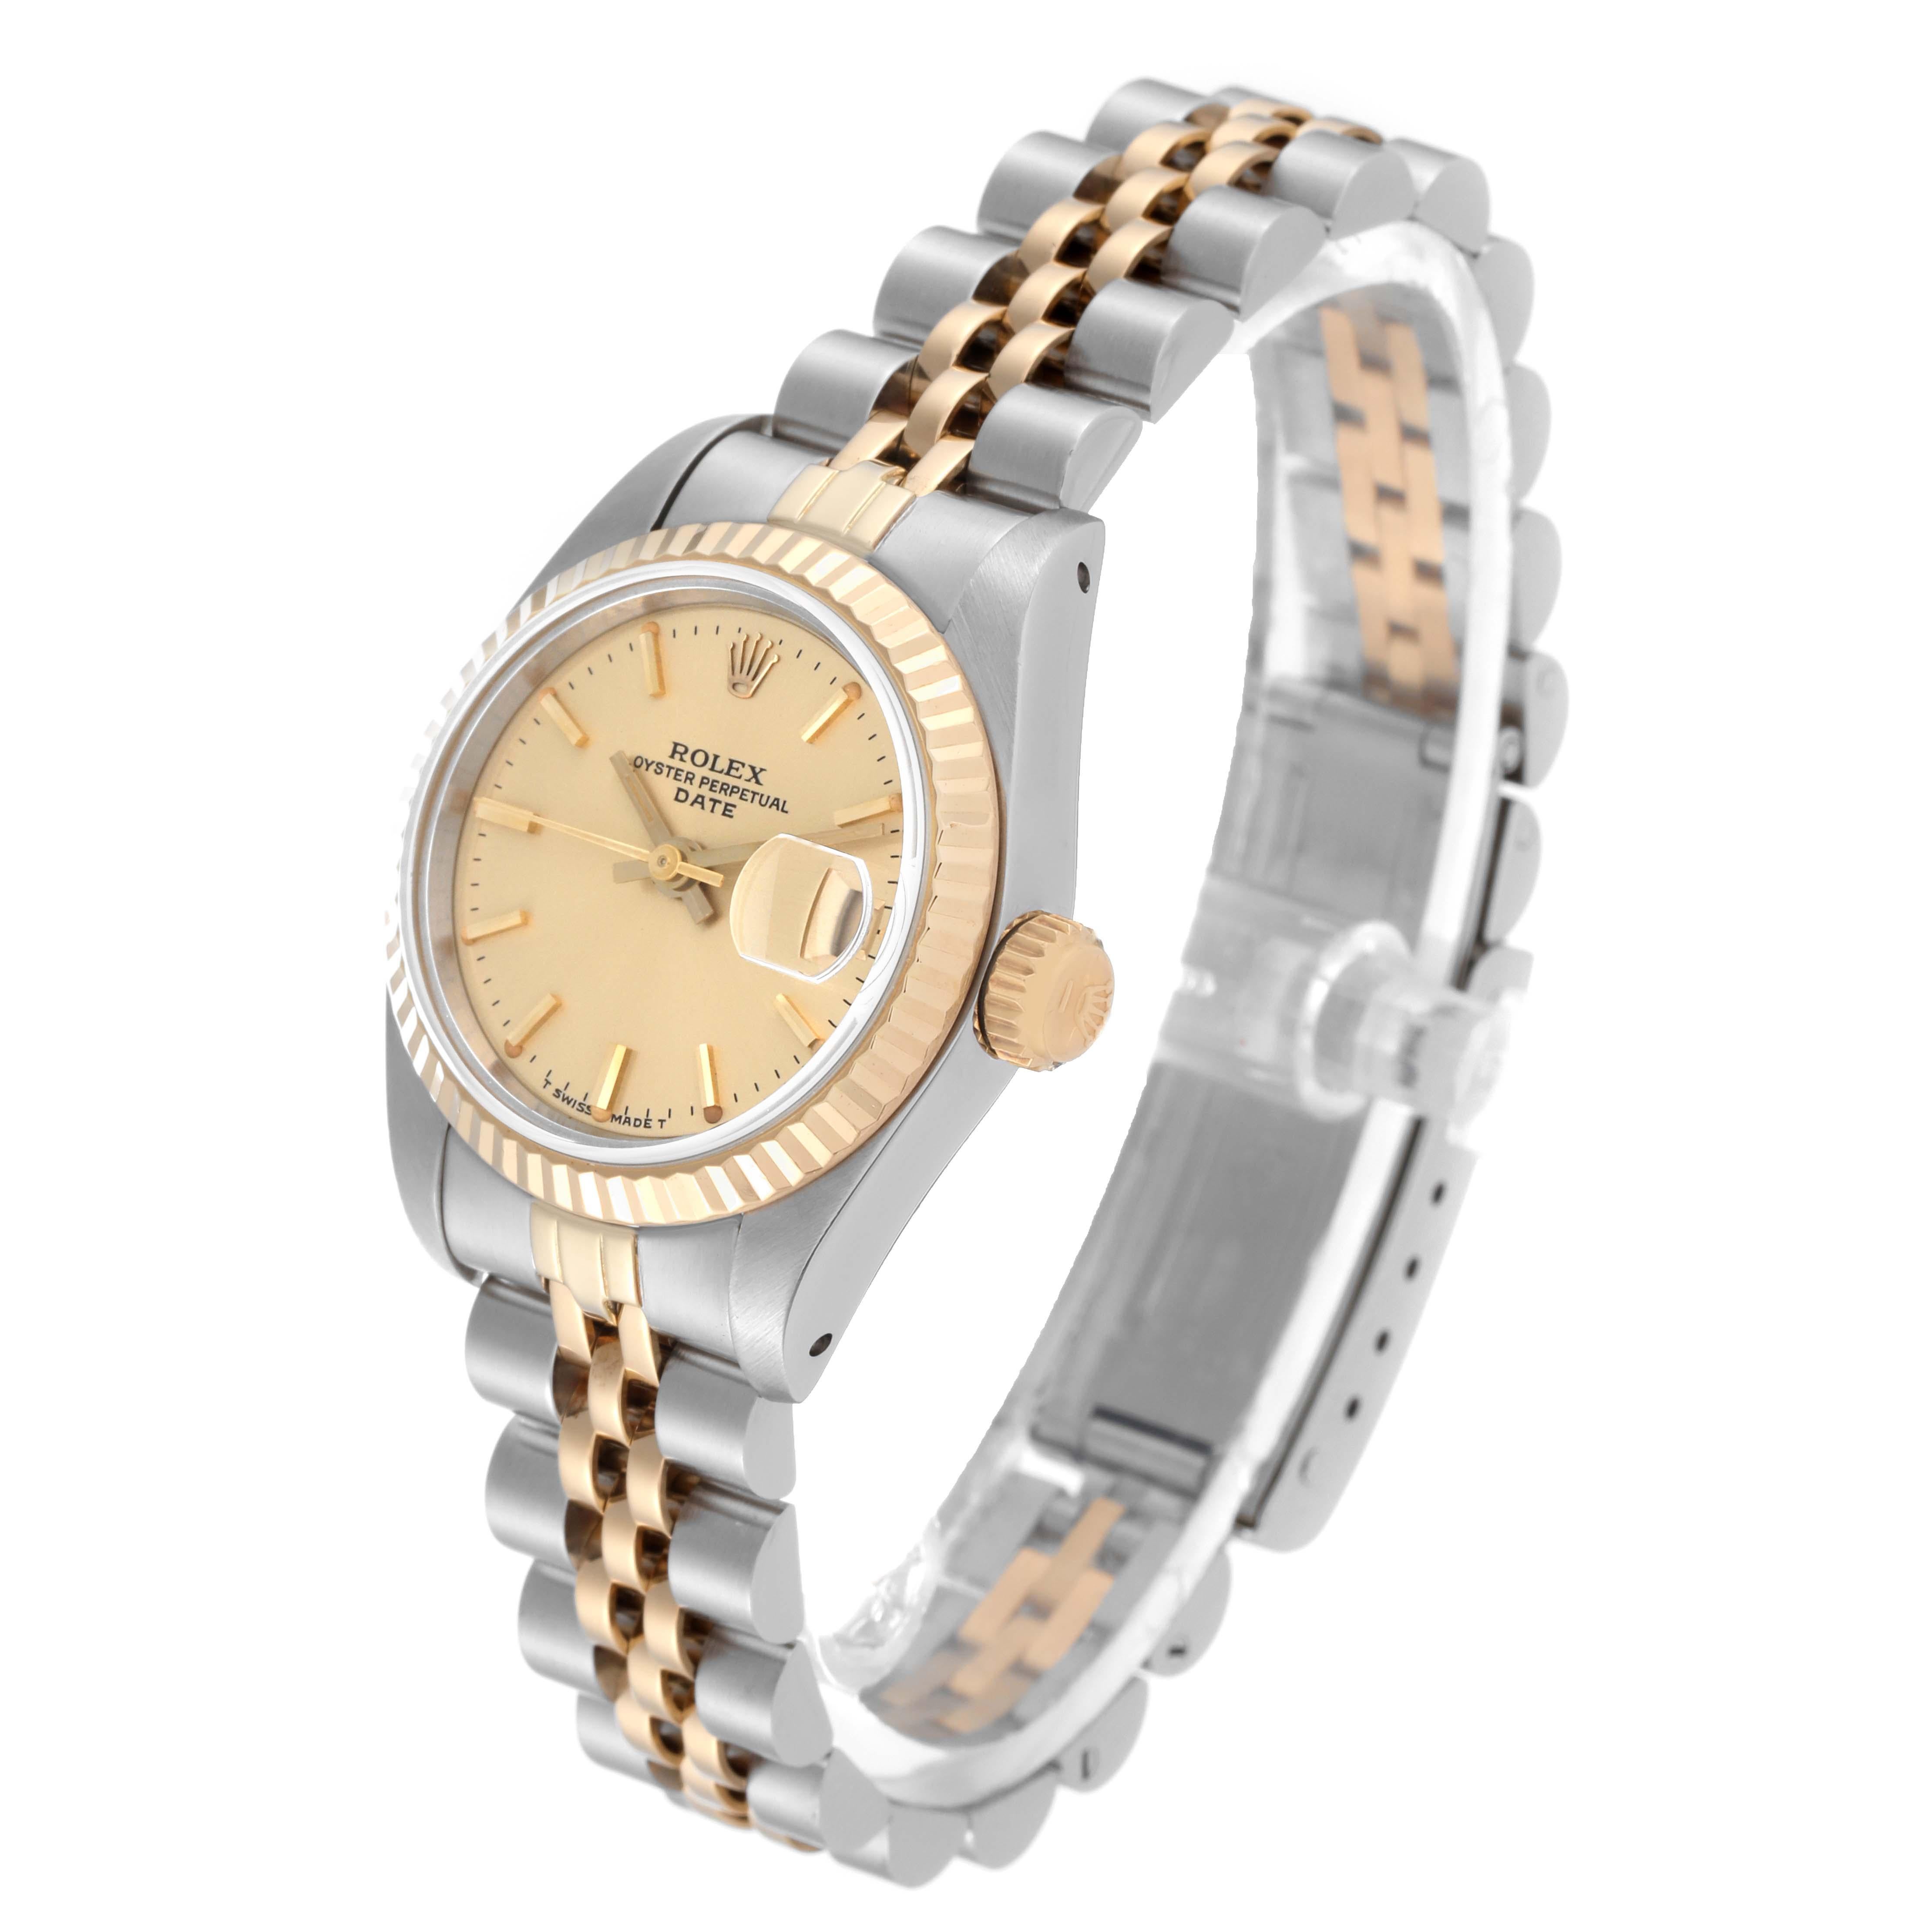 Rolex Datejust Champagne Dial Steel Yellow Gold Ladies Watch 69173 For Sale 6